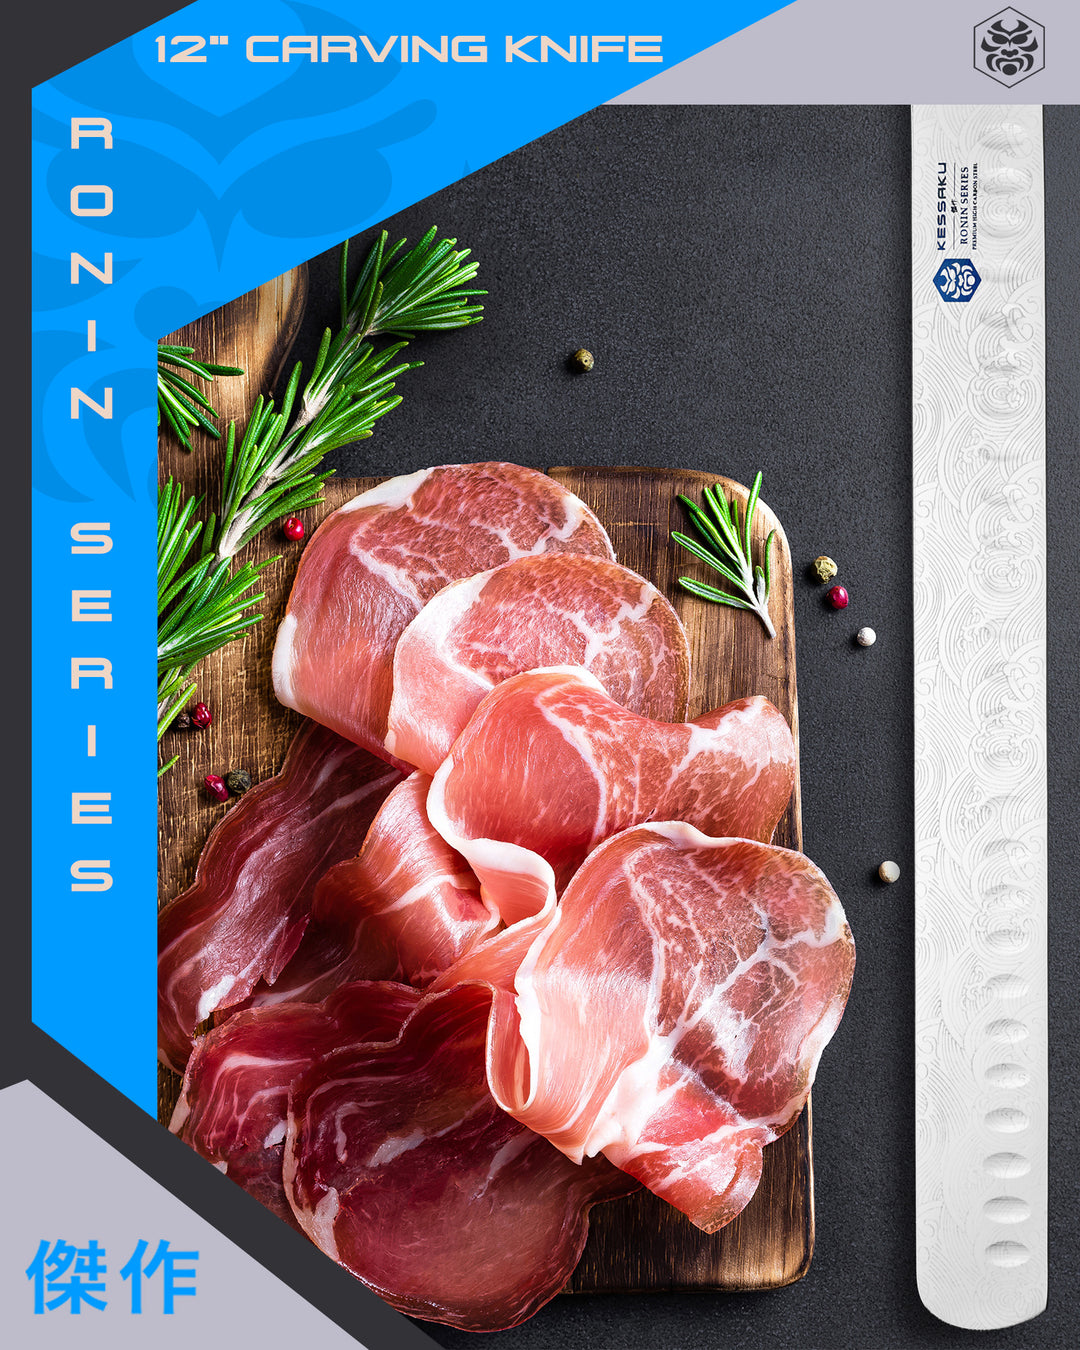 Ultra thin slices of jamon on a cutting board next to the Ronin Series Carving Knife